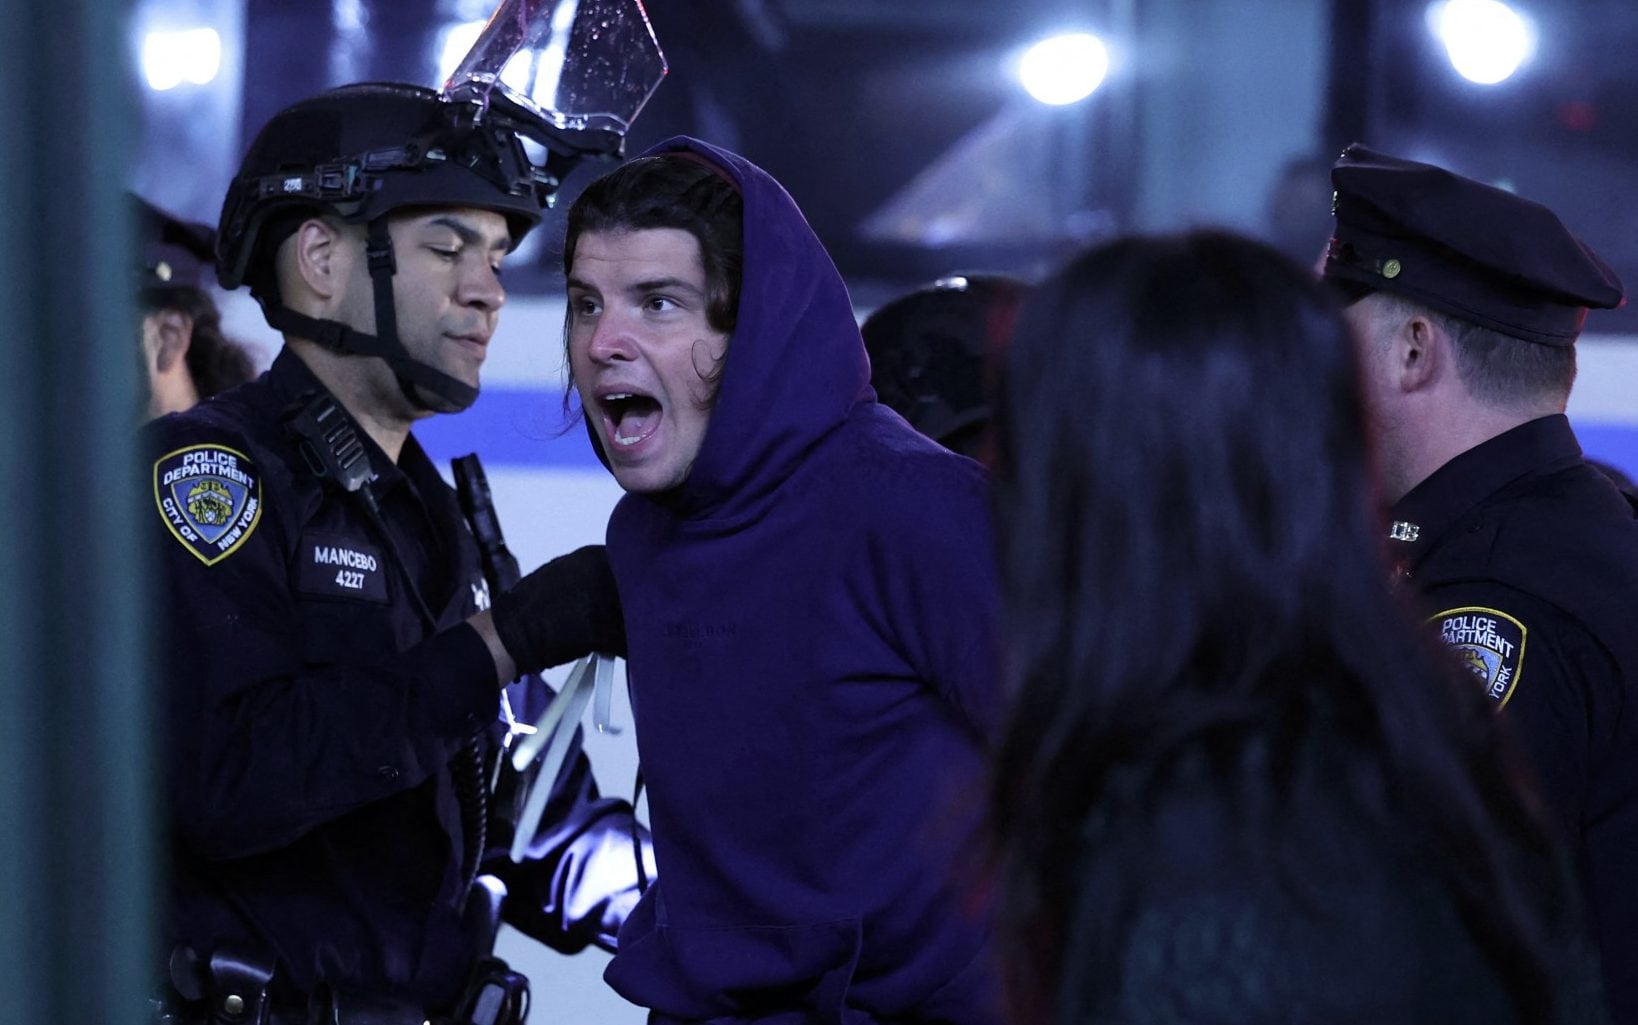 riot police storm columbia campus and drag pro-palestine protesters from barricade